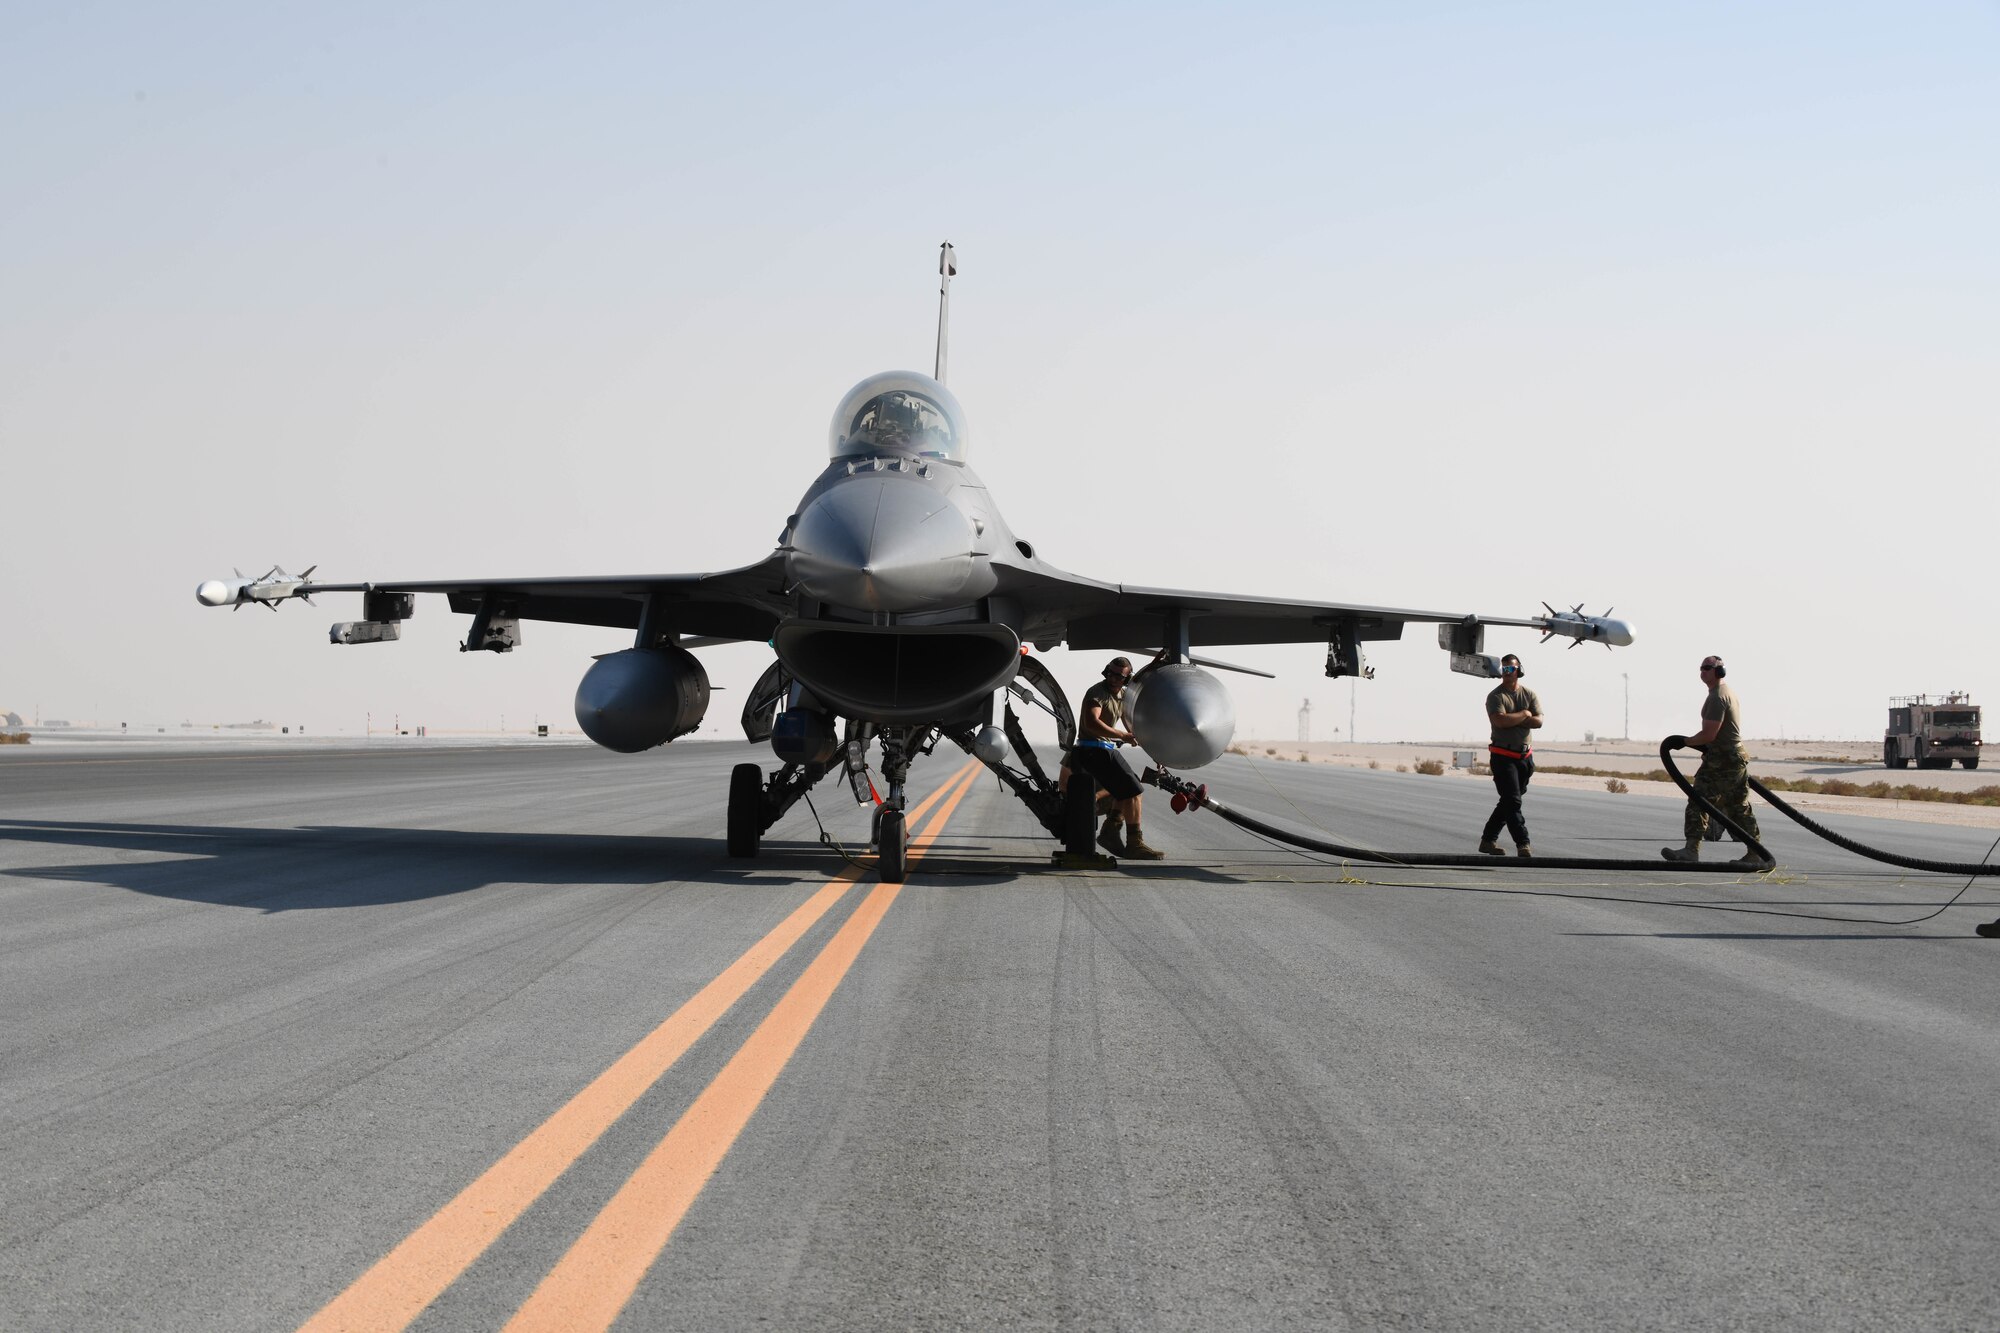 Airmen assigned to the 379th Expeditionary Maintenance Group at Al Udeid Air Base, Qatar, hook a fuel hose to a U.S. Air Force F-16 Fighting Falcon assigned to the 77th Fighter Squadron from Prince Sultan Air Base, Kingdom of Saudi Arabia, on the flight line of AUAB on Nov. 10, 2020. The training qualified AUAB Airmen assigned to the 379th Expeditionary Maintenance Group and the 379th Expeditionary Logistics Readiness Squadron to support 24-hour hot refueling operations on multiple aircraft that rotate through the base. Hot refueling allows aircrew to land and keep their engines running while they refuel, before taking off to continue the next leg of their respective missions. (U.S. Air Force photo by Staff Sgt. Kayla White)